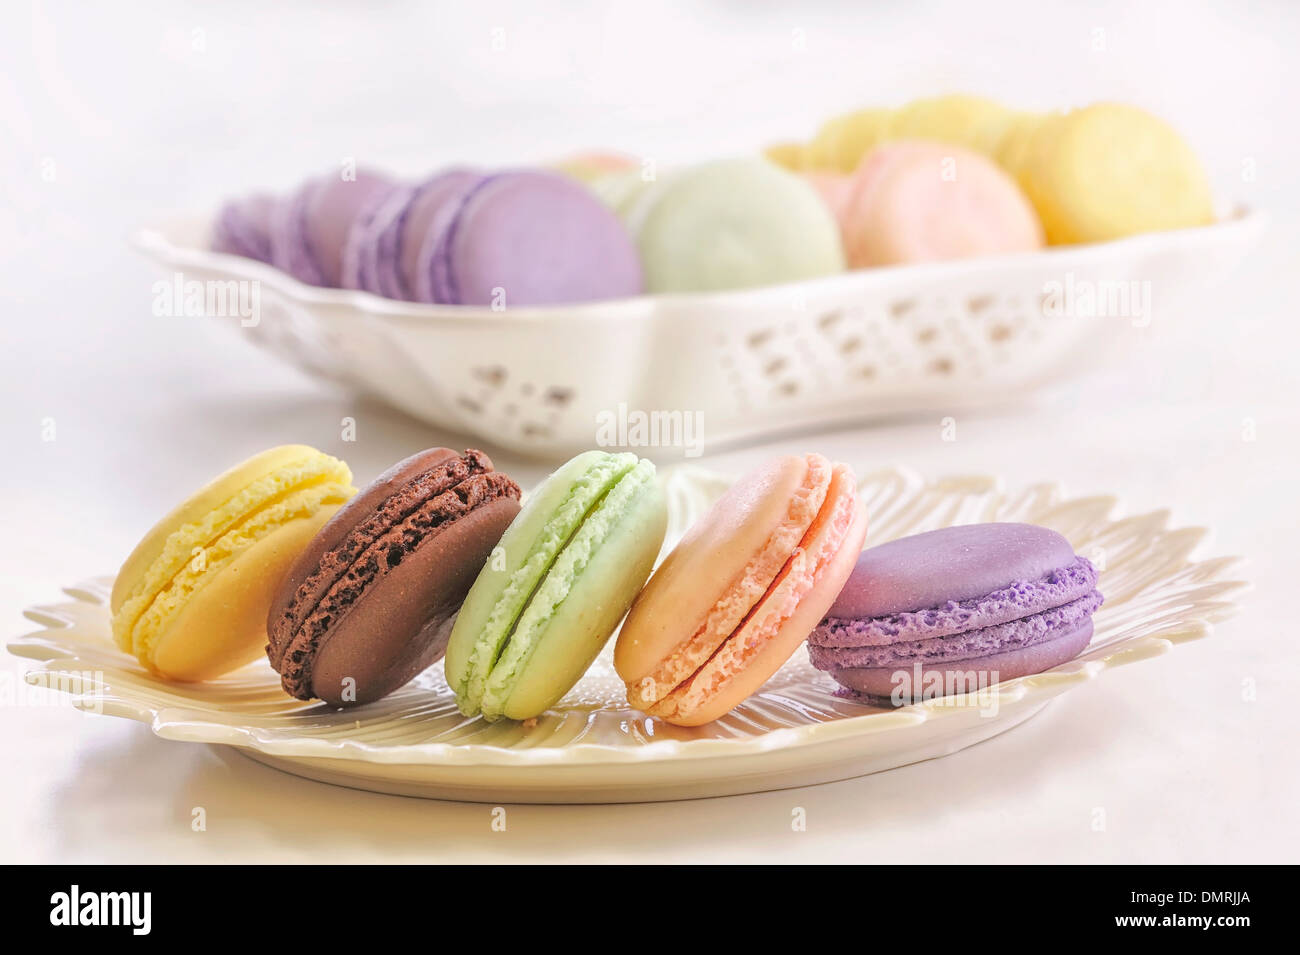 An assortment of cassis, citron, raspberry, chocolate and pistachio flavored macarons Stock Photo